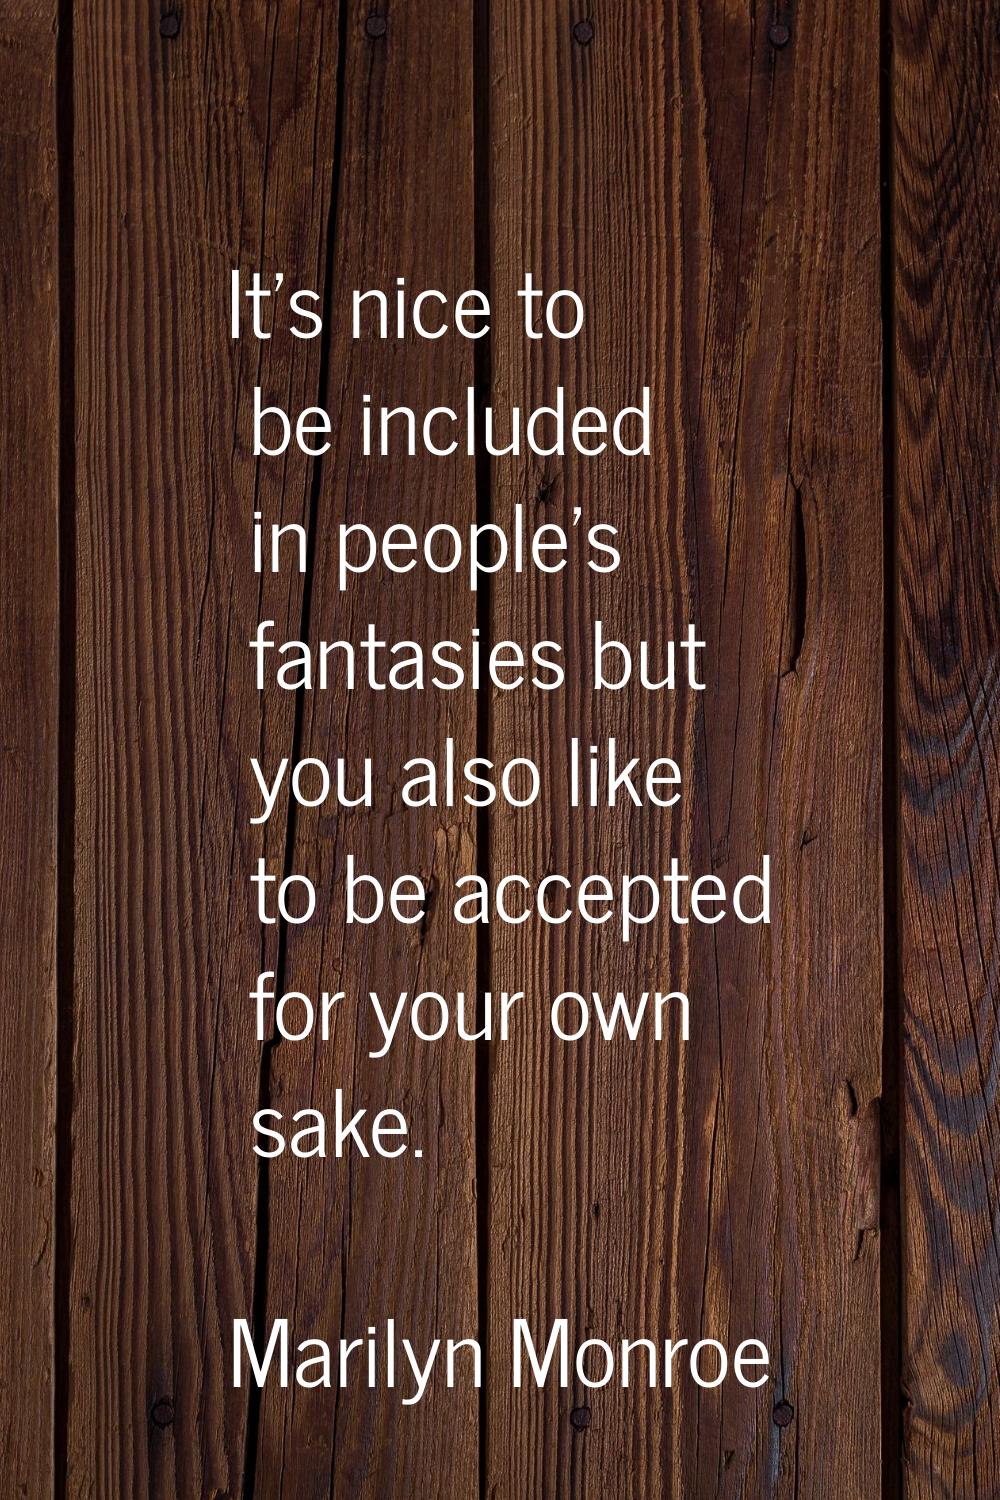 It's nice to be included in people's fantasies but you also like to be accepted for your own sake.